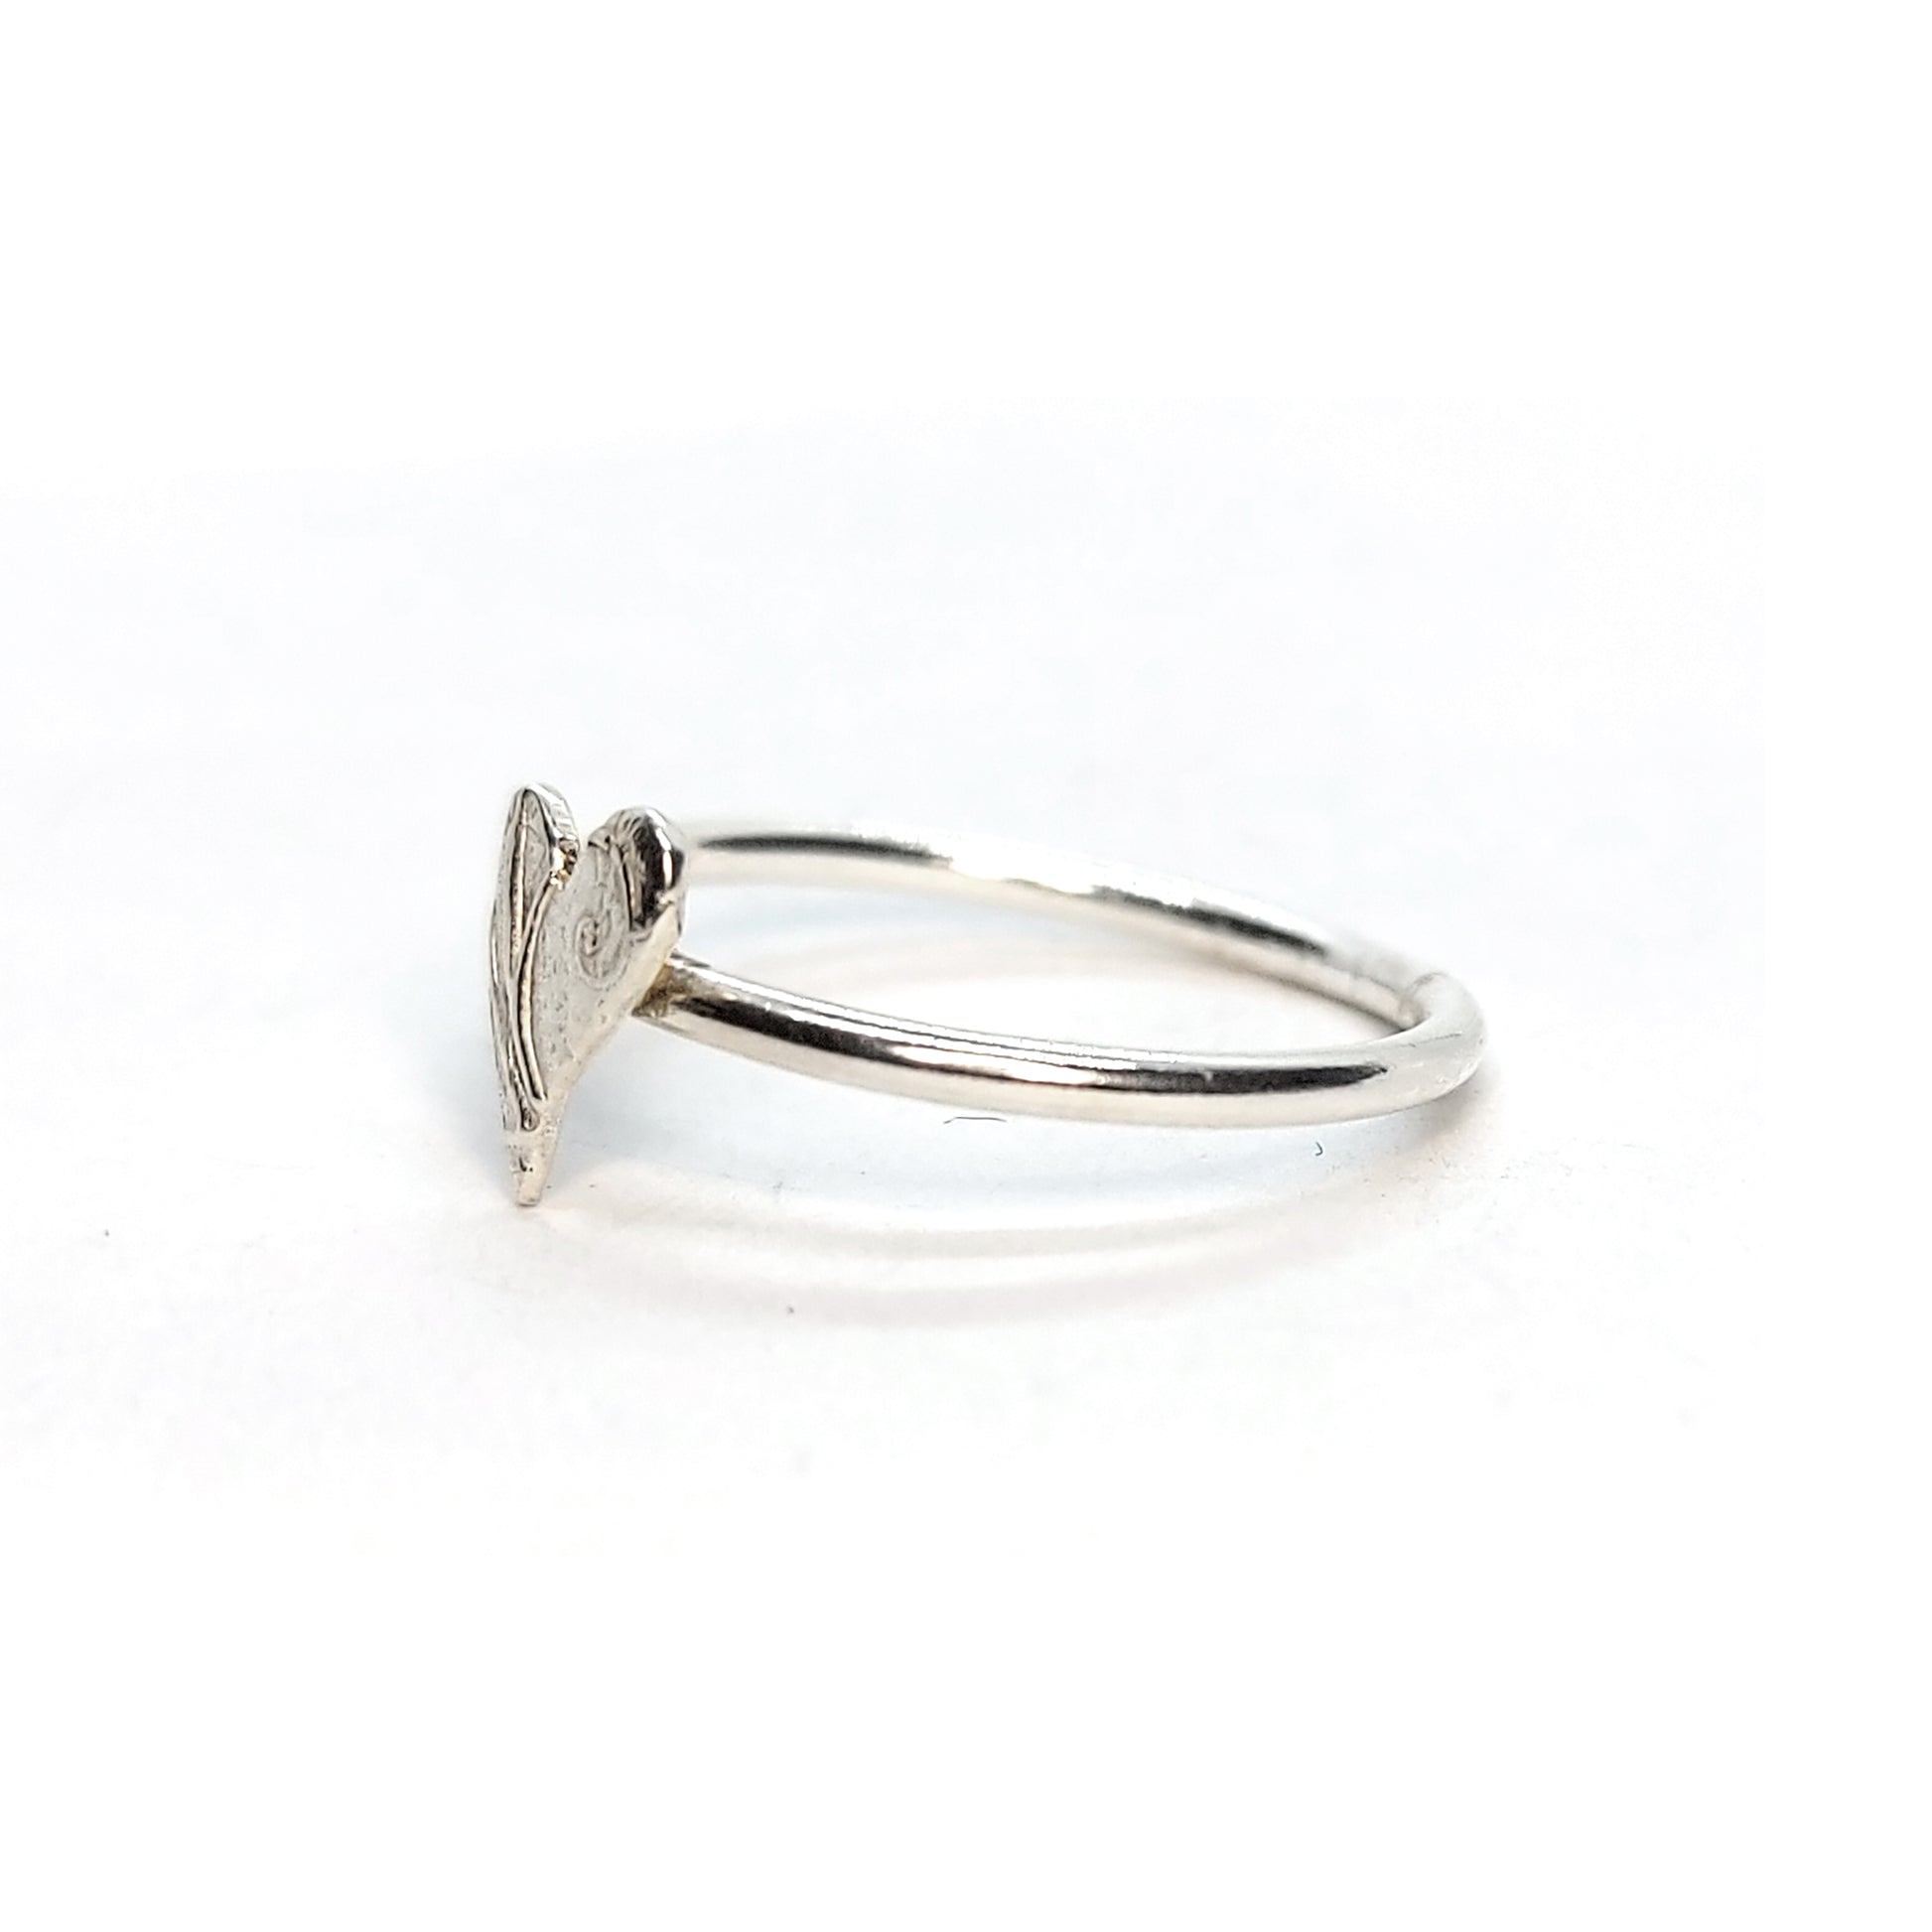 A silver stacking ring with an asymmetric patterned heart in the centre.